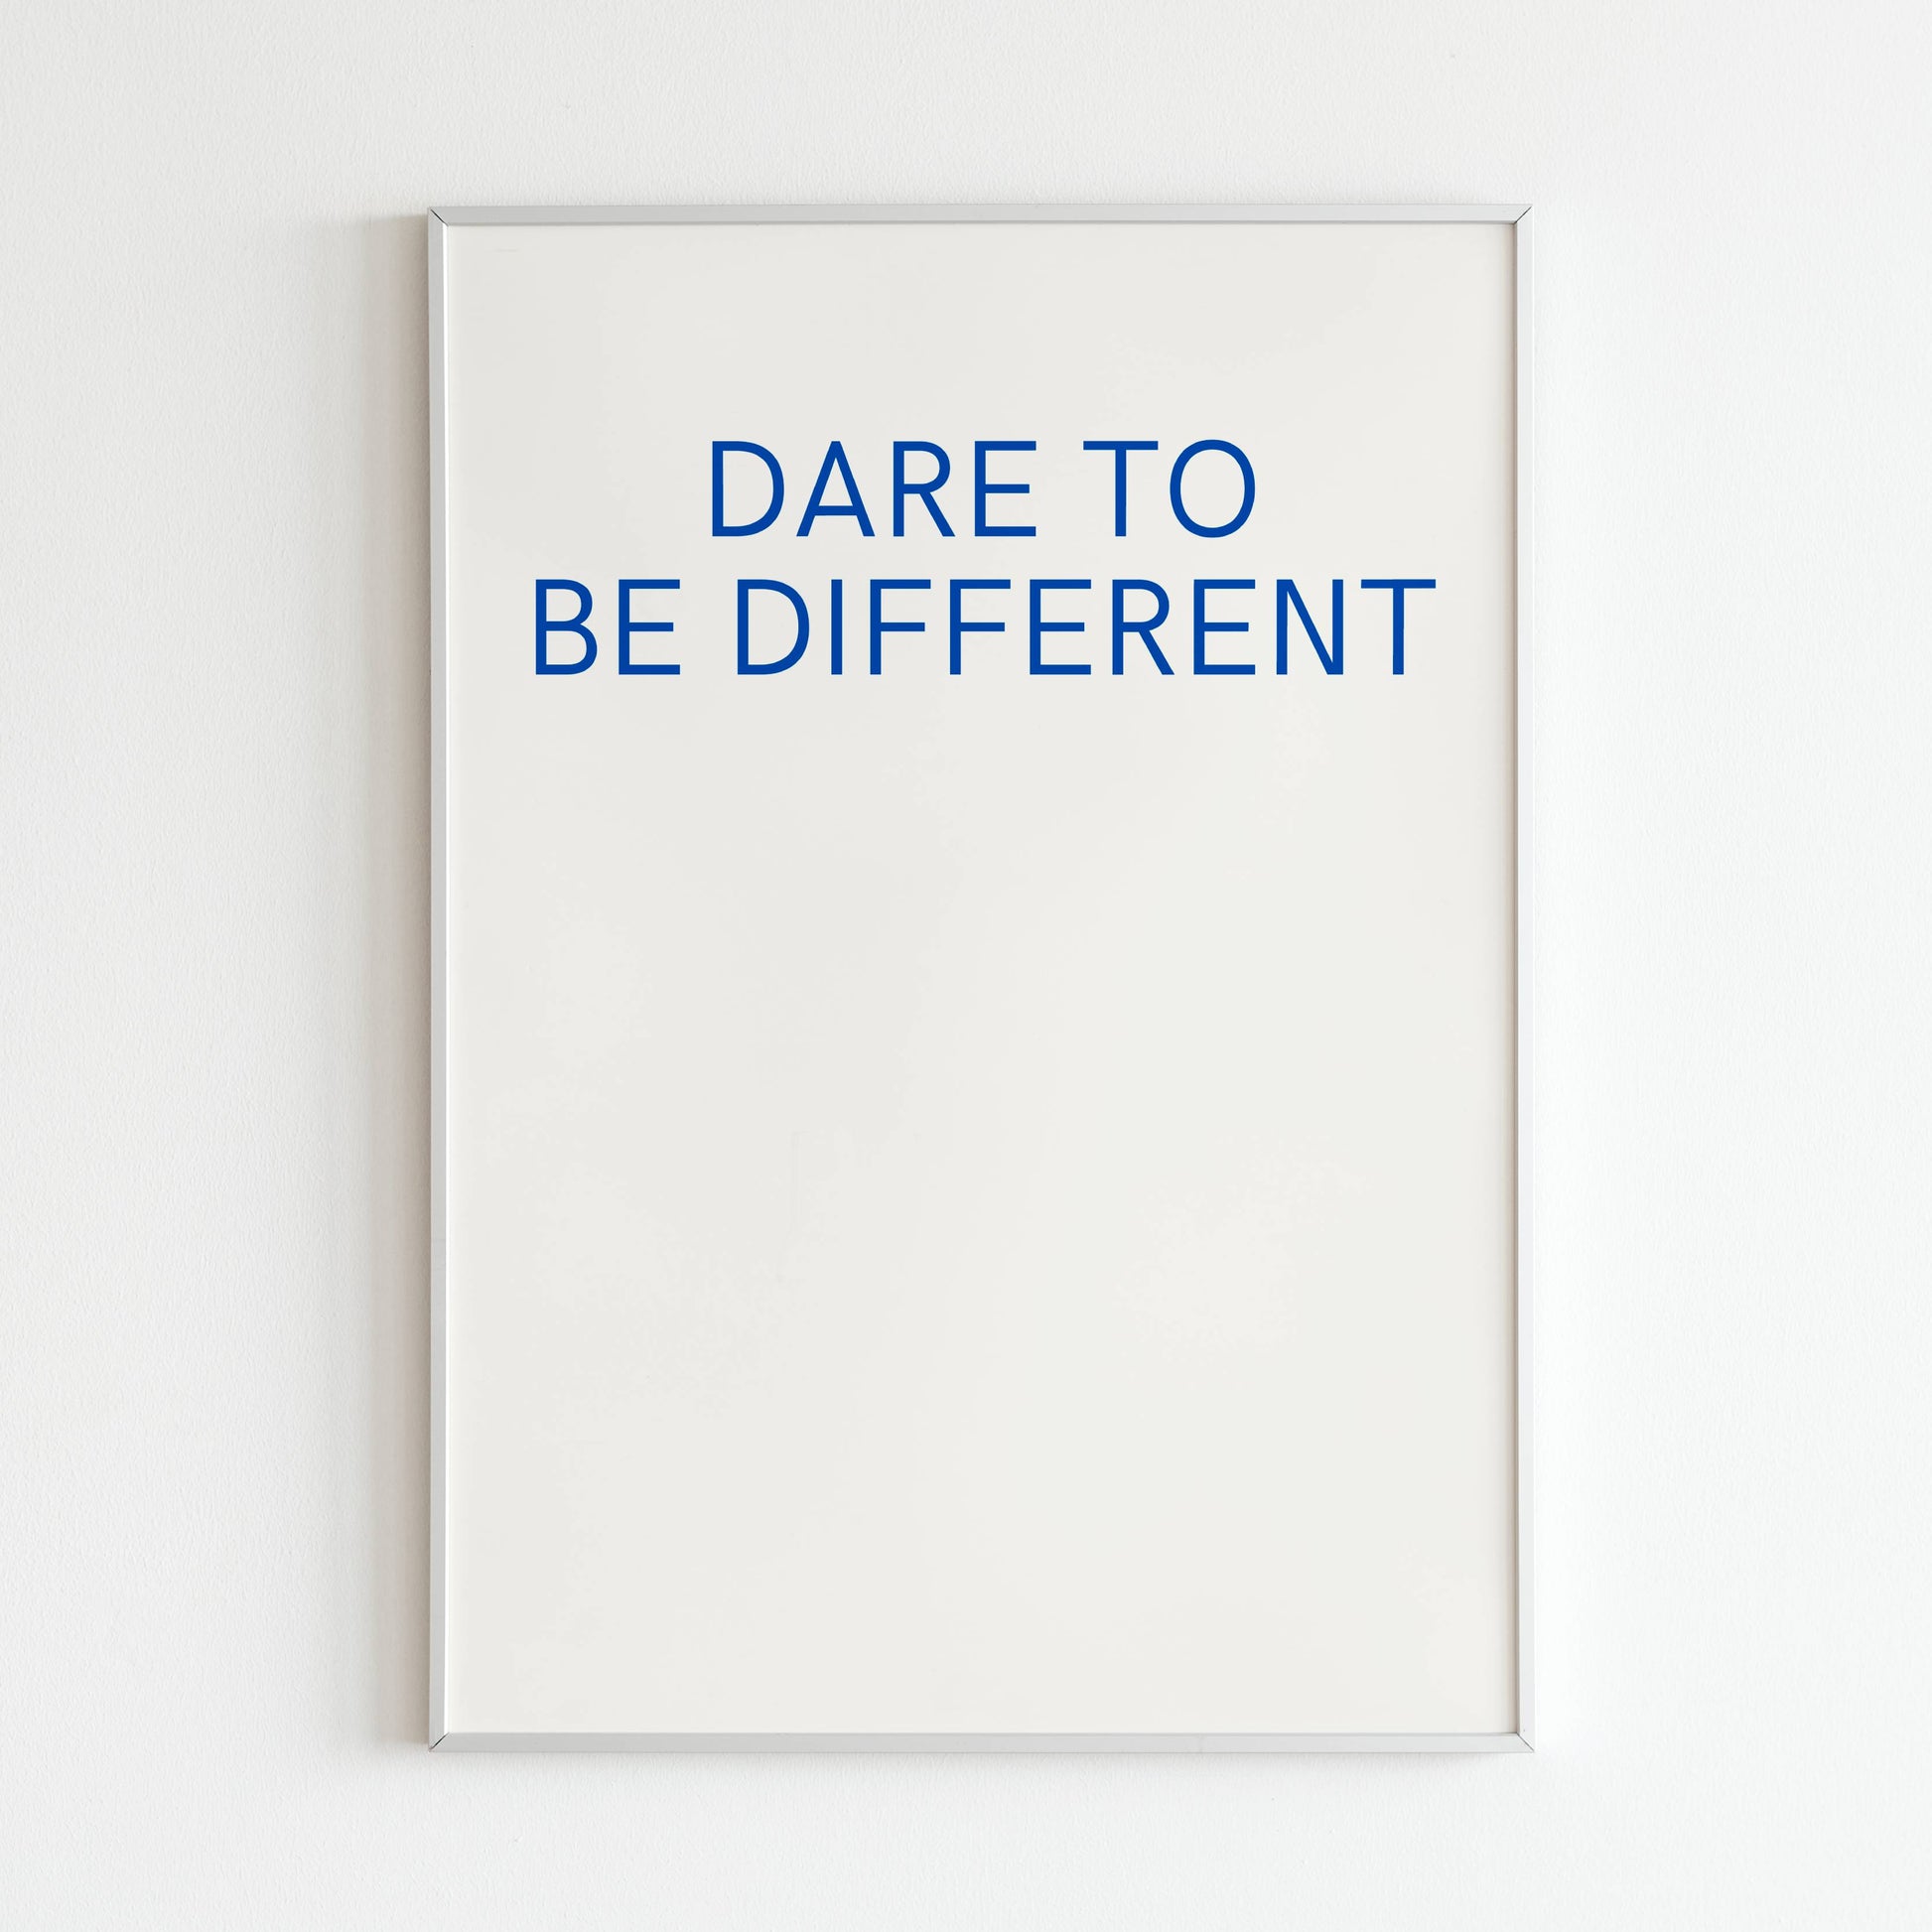 Downloadable "Dare to be different" art print, inspire courage and authenticity with a bold message.